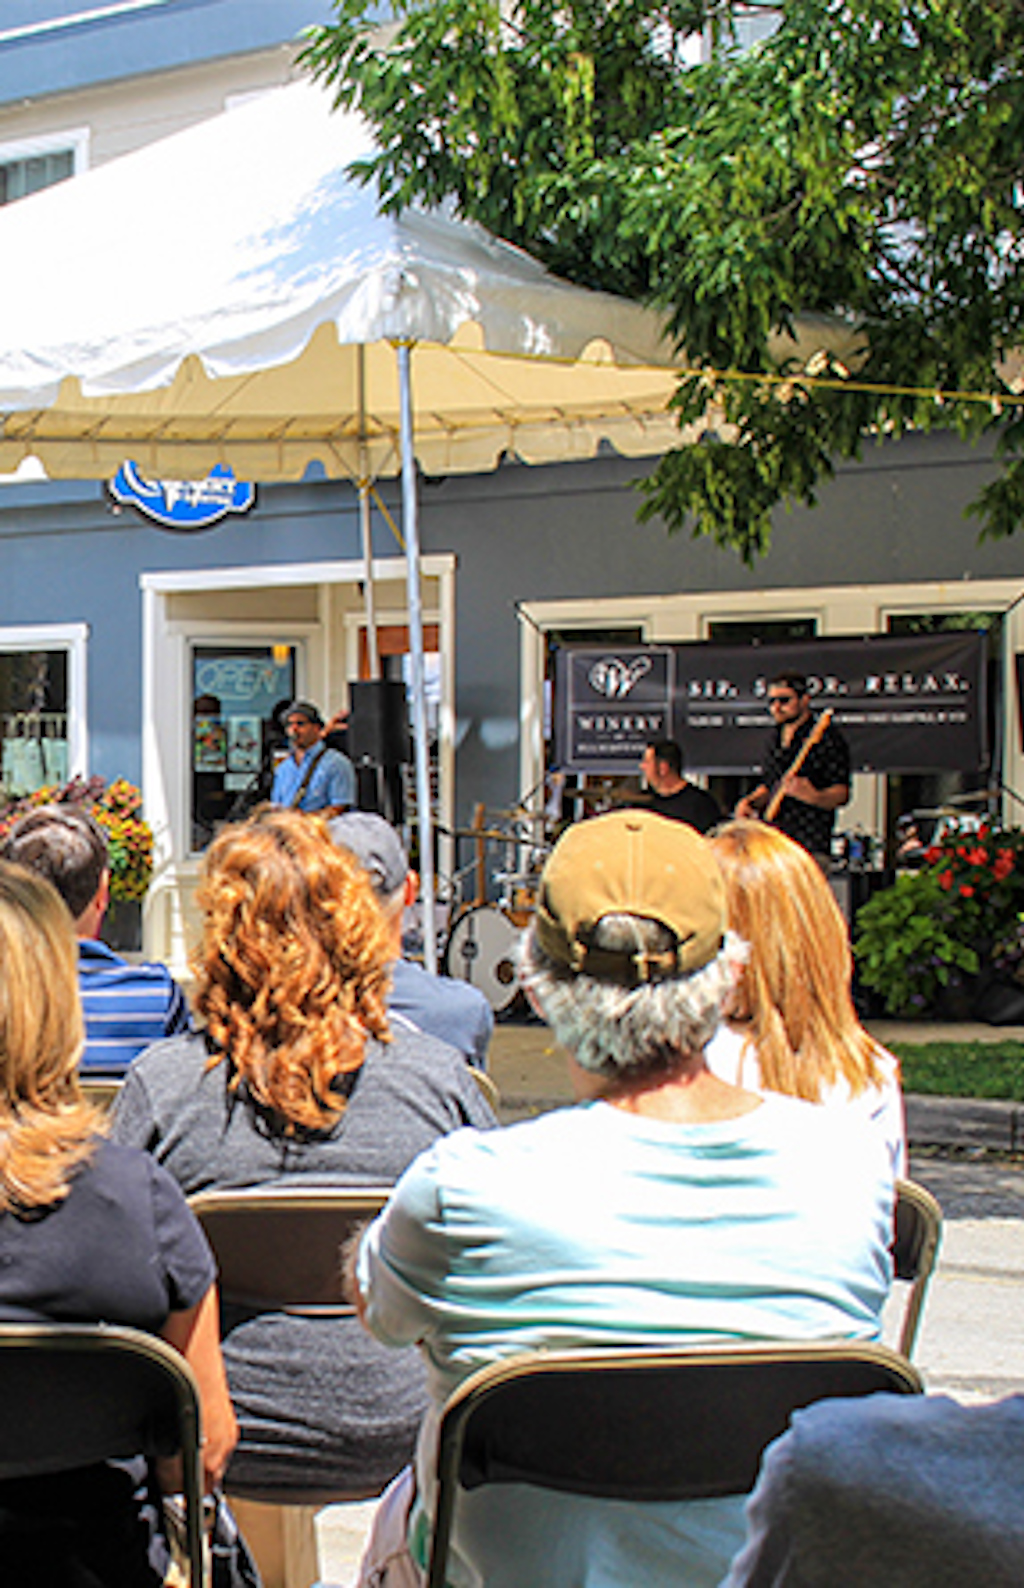 A crowd sits and listens to music being played outside in downtown Ellicottville on a summer day.